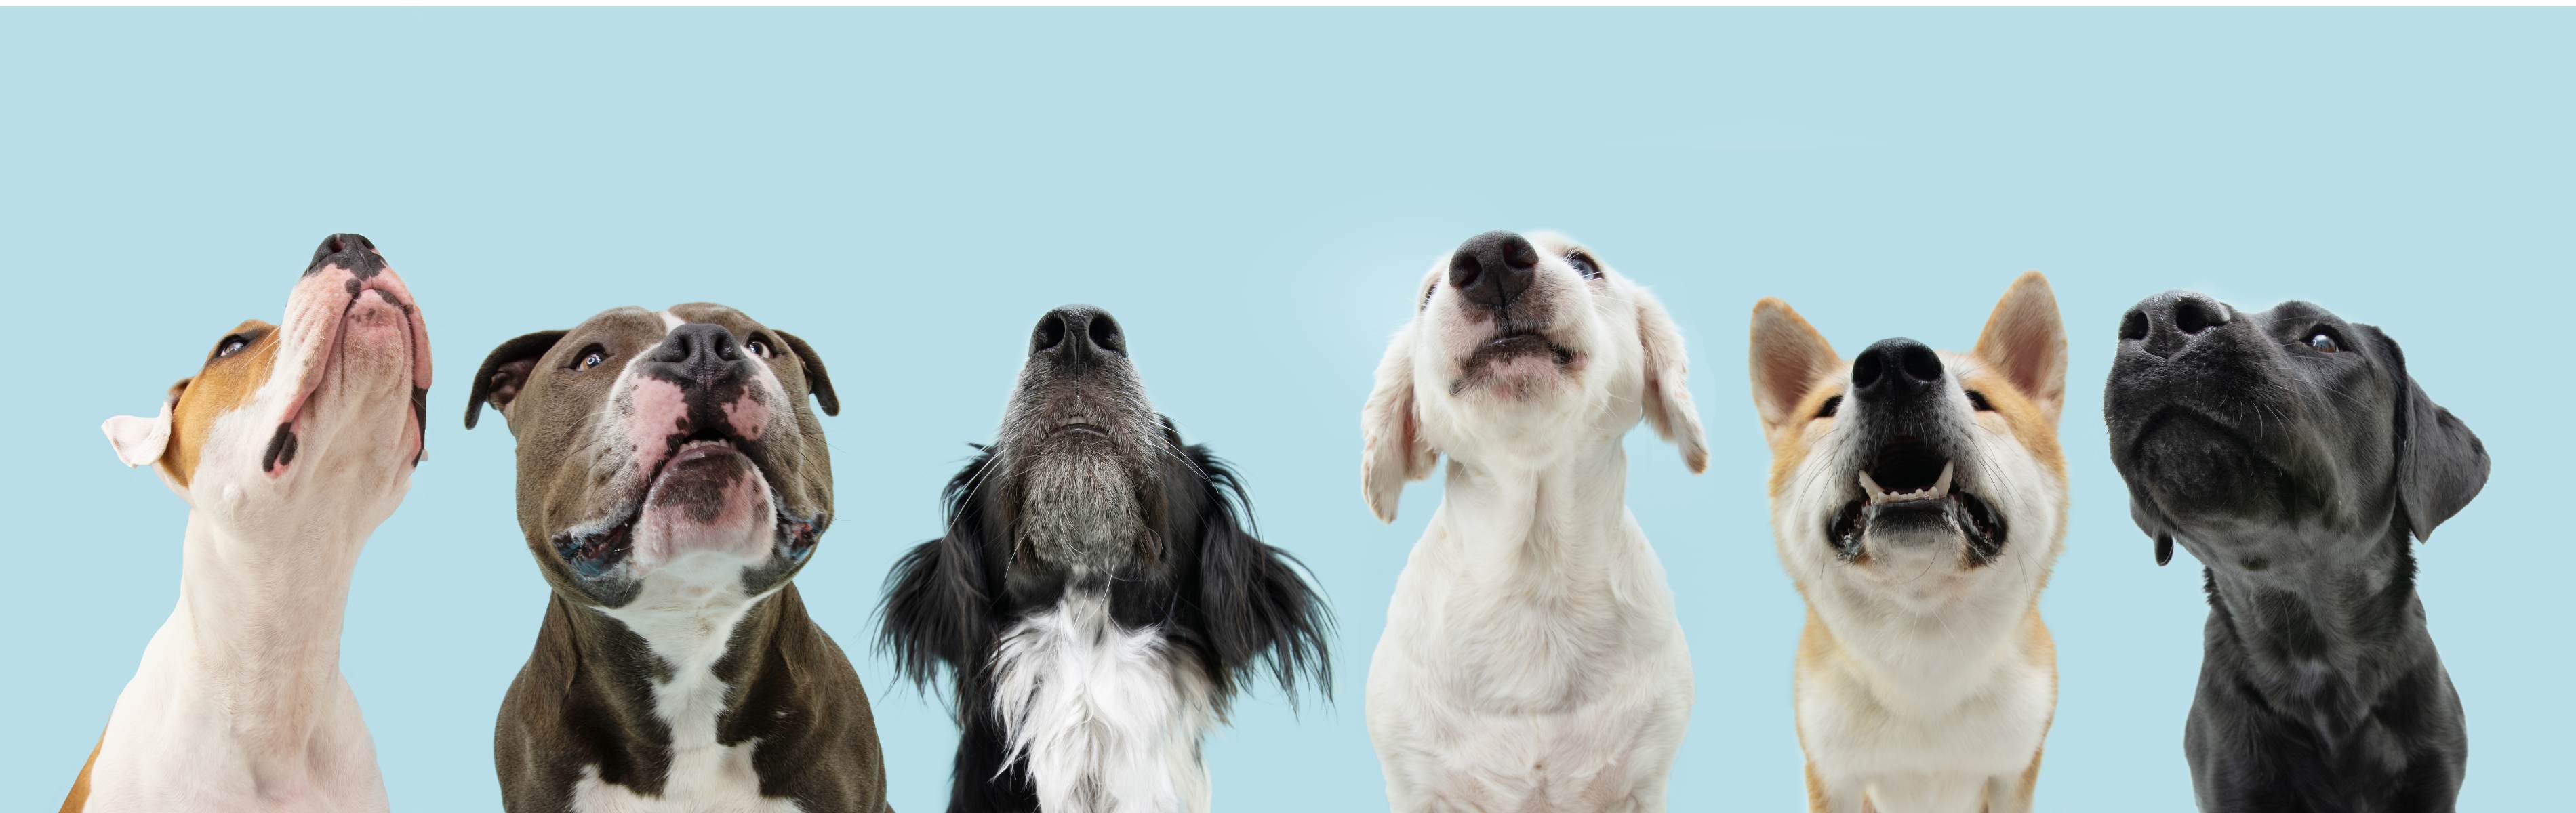 A line-up of well-trained dogs howling for their picture with Dog Training Elite - get acton dog training today!